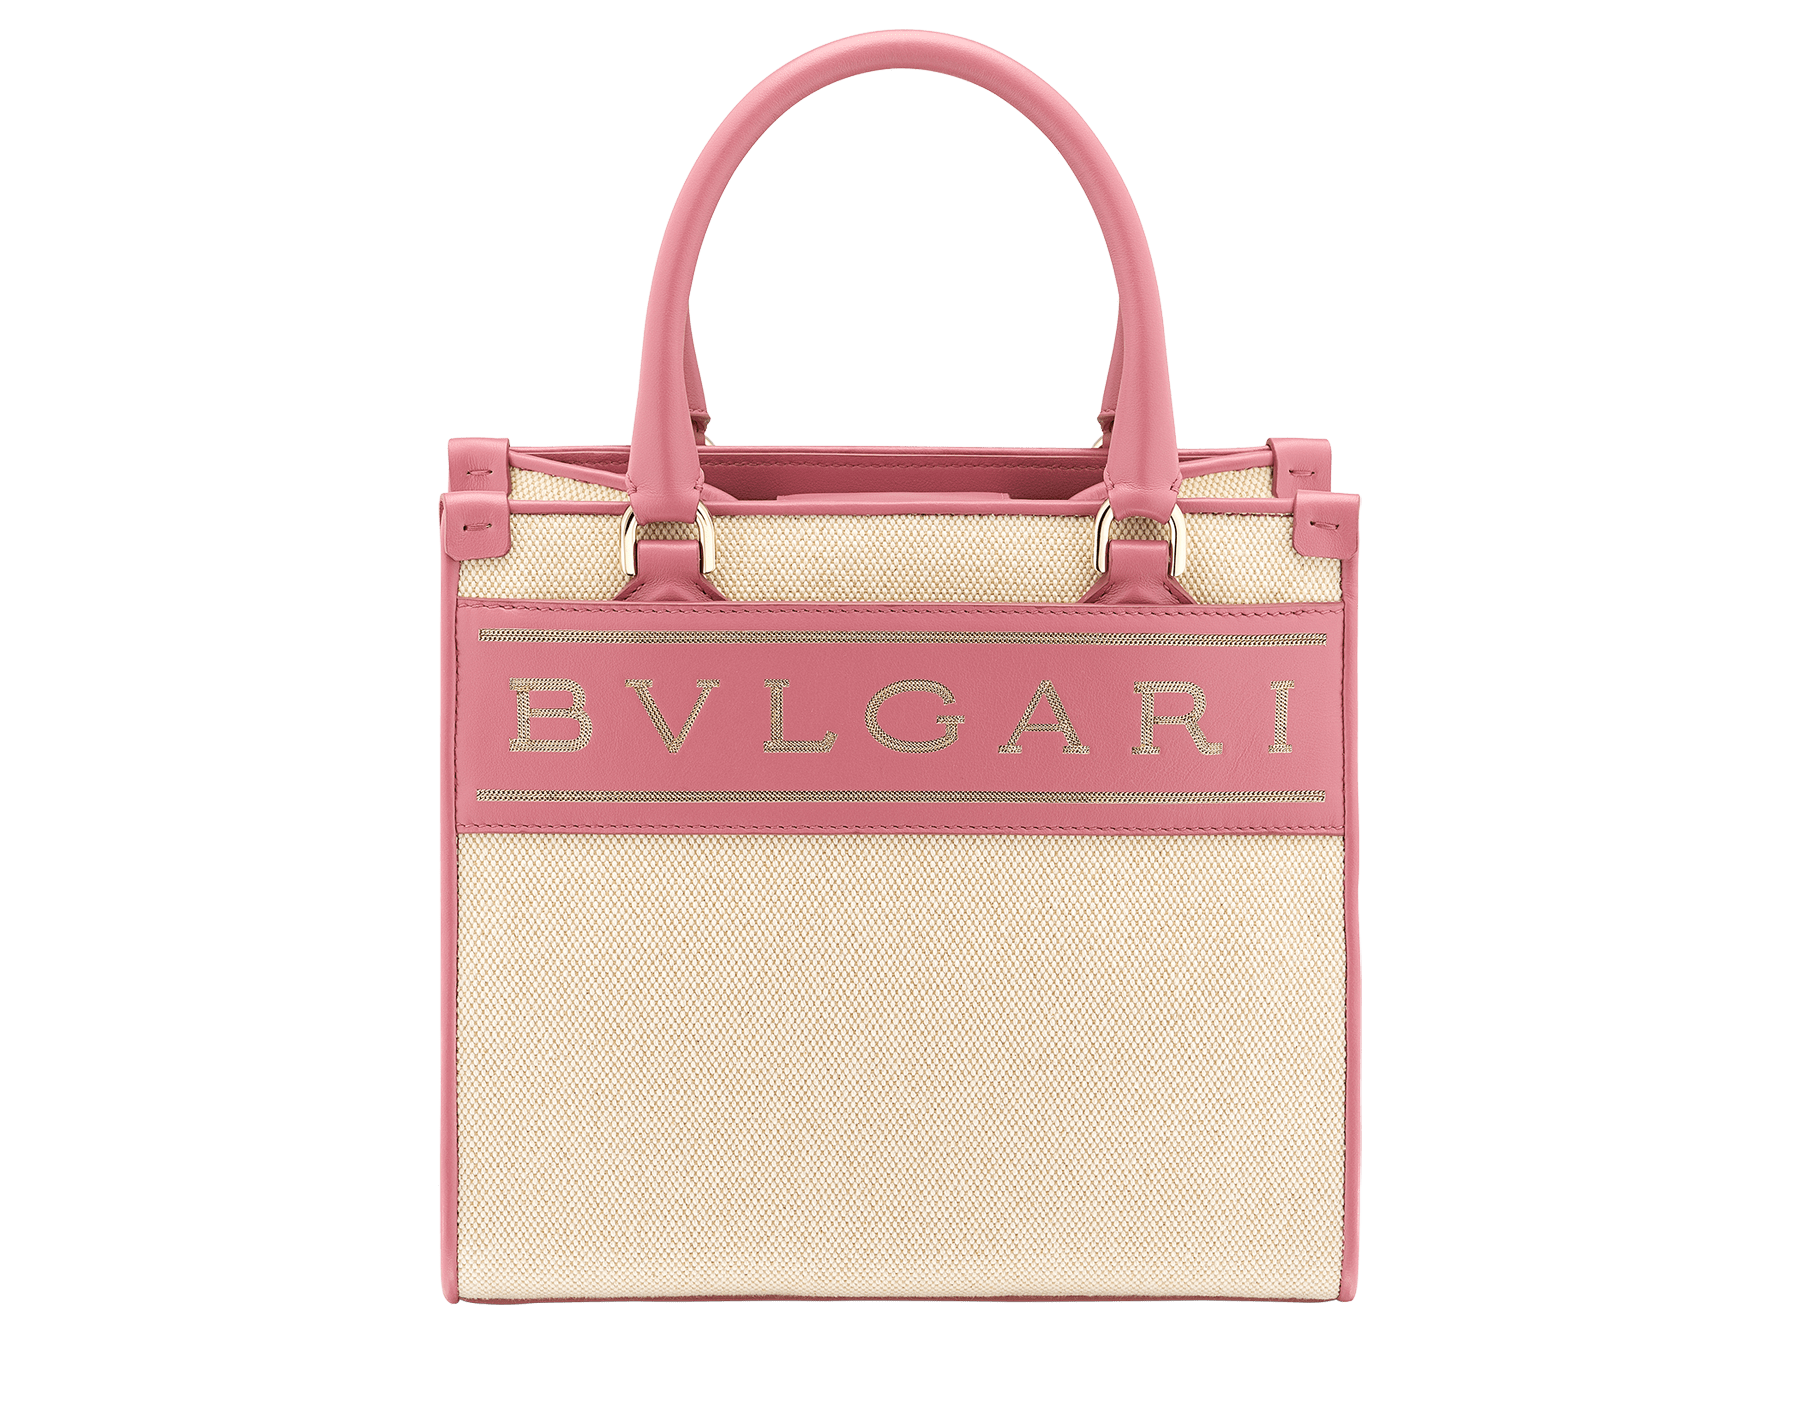 "Bvlgari Logo" small tote bag in Ivory Opal white canvas, with Beet Amethyst purple grosgrain inner lining. Bvlgari logo featured with light gold-plated brass chain inserts on the Ivory Opal white calf leather. BVL-1159-CC image 1